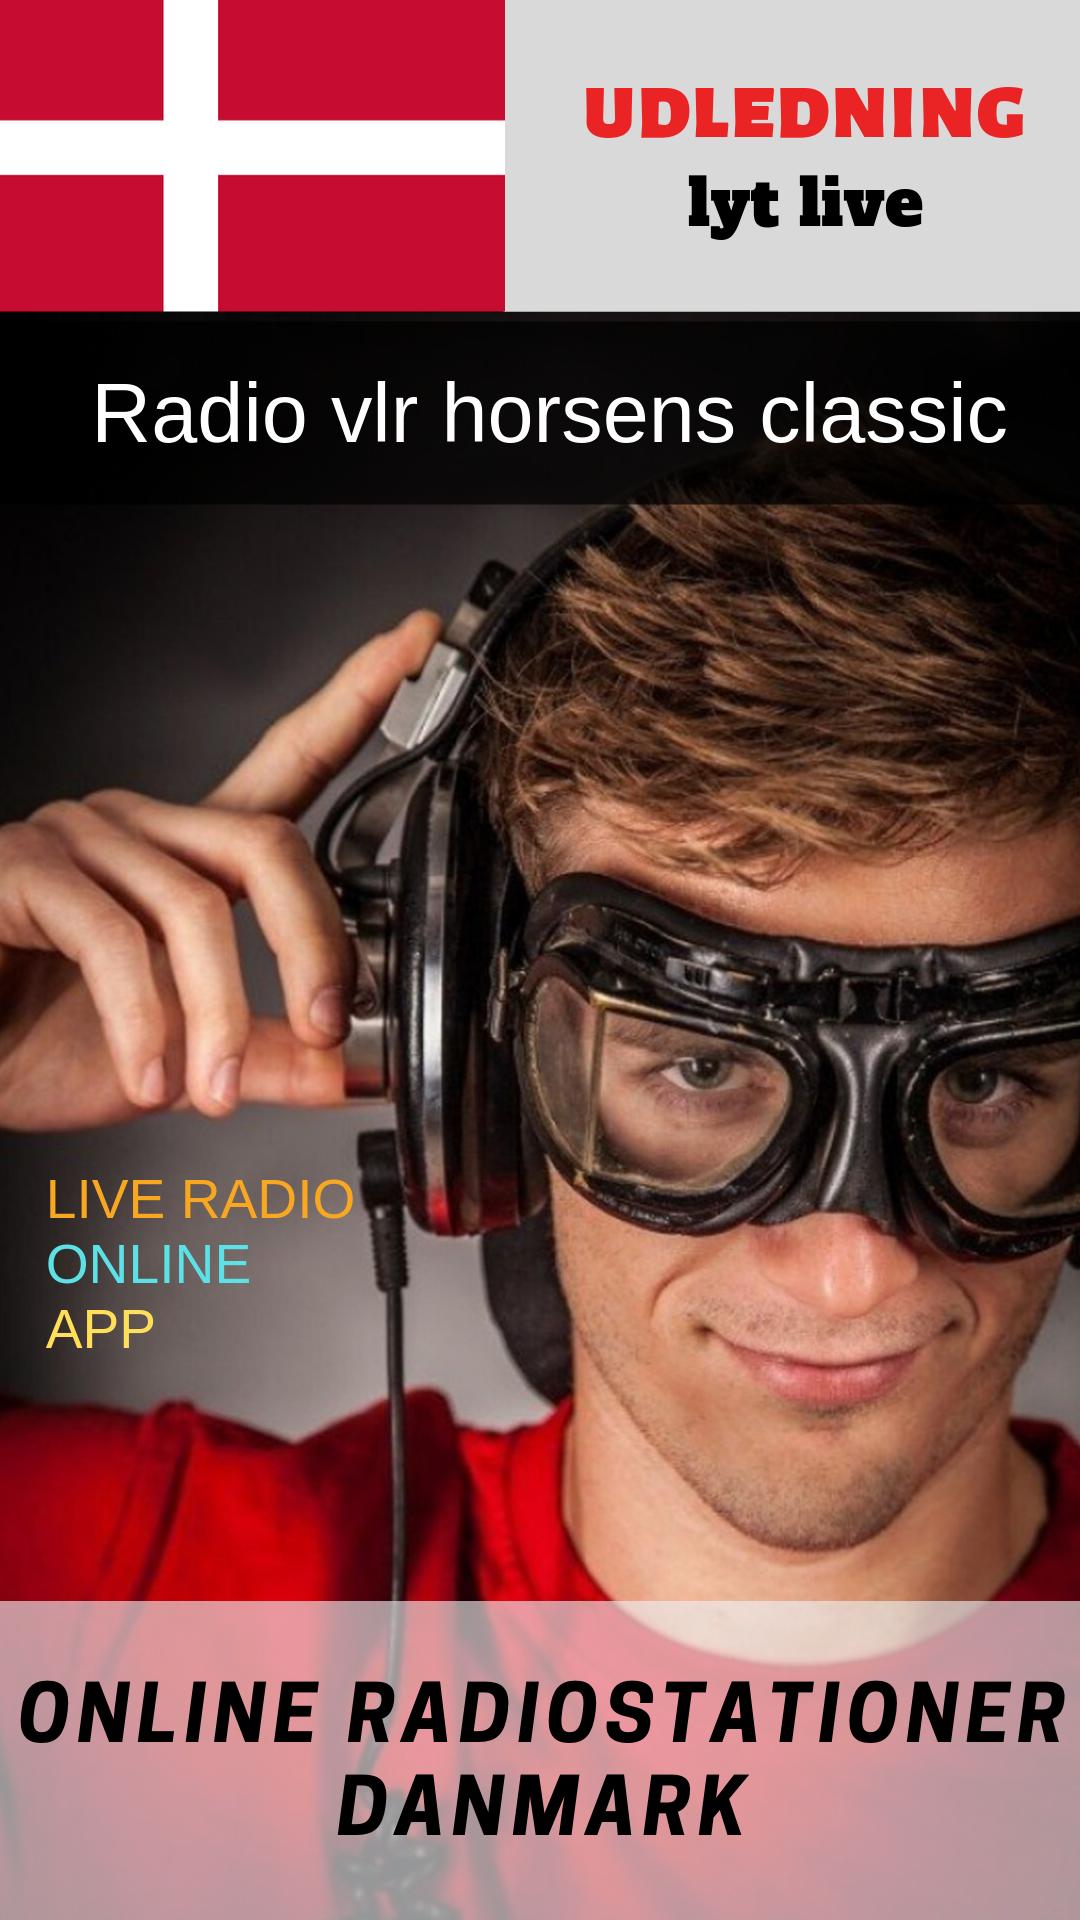 Radio Vlr horsens Classic for Android - APK Download